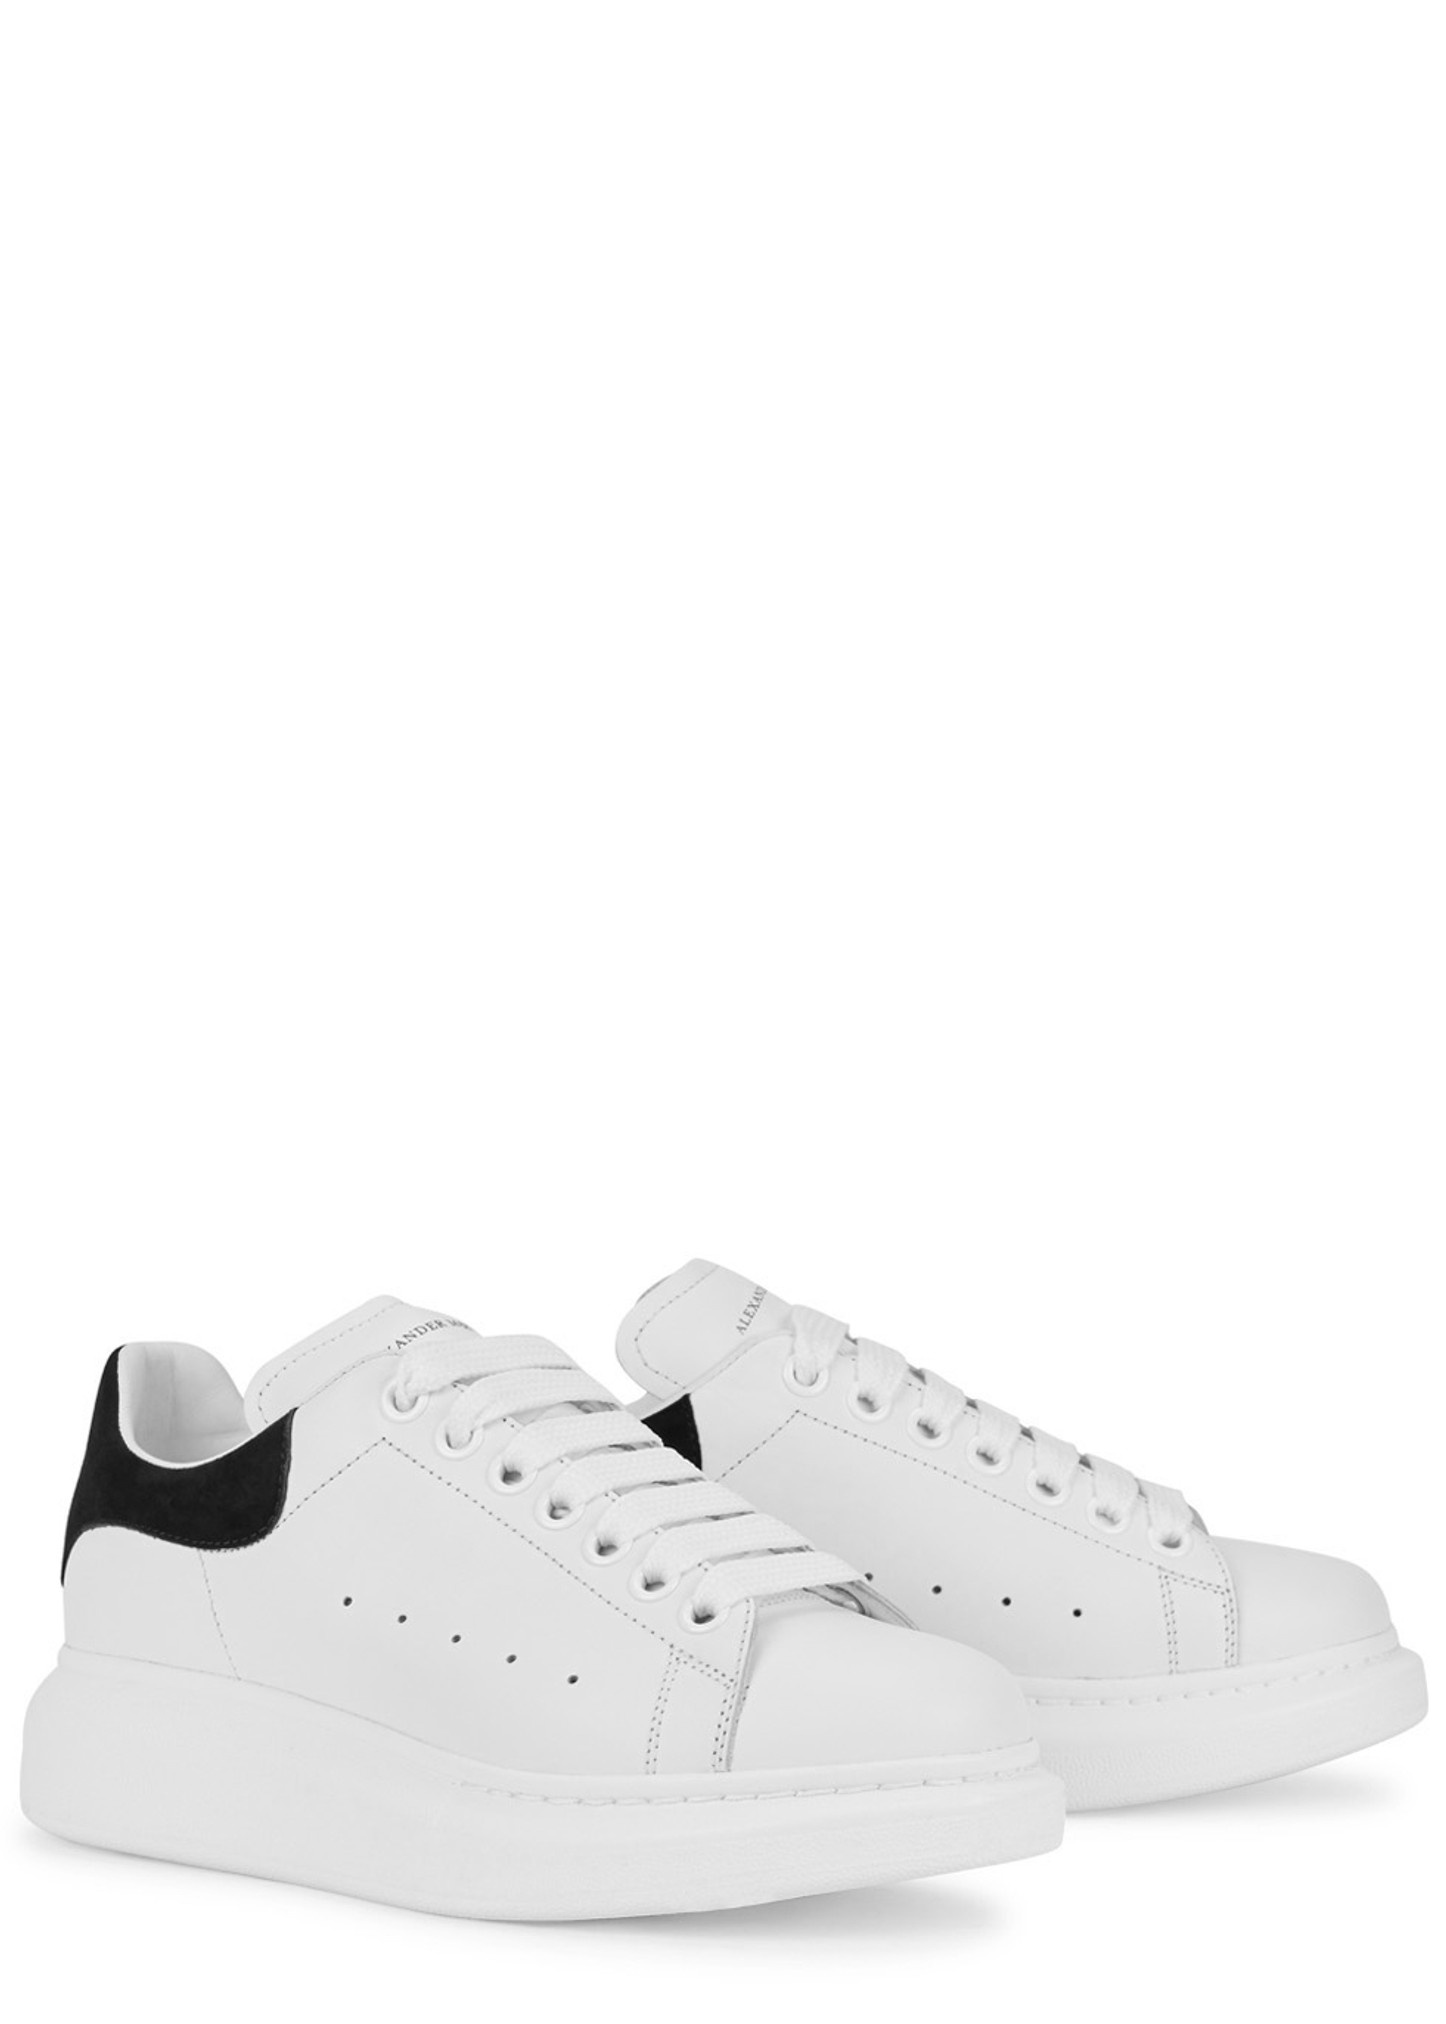 Alexander McQueen Oversized white leather sneakers | REVERSIBLE